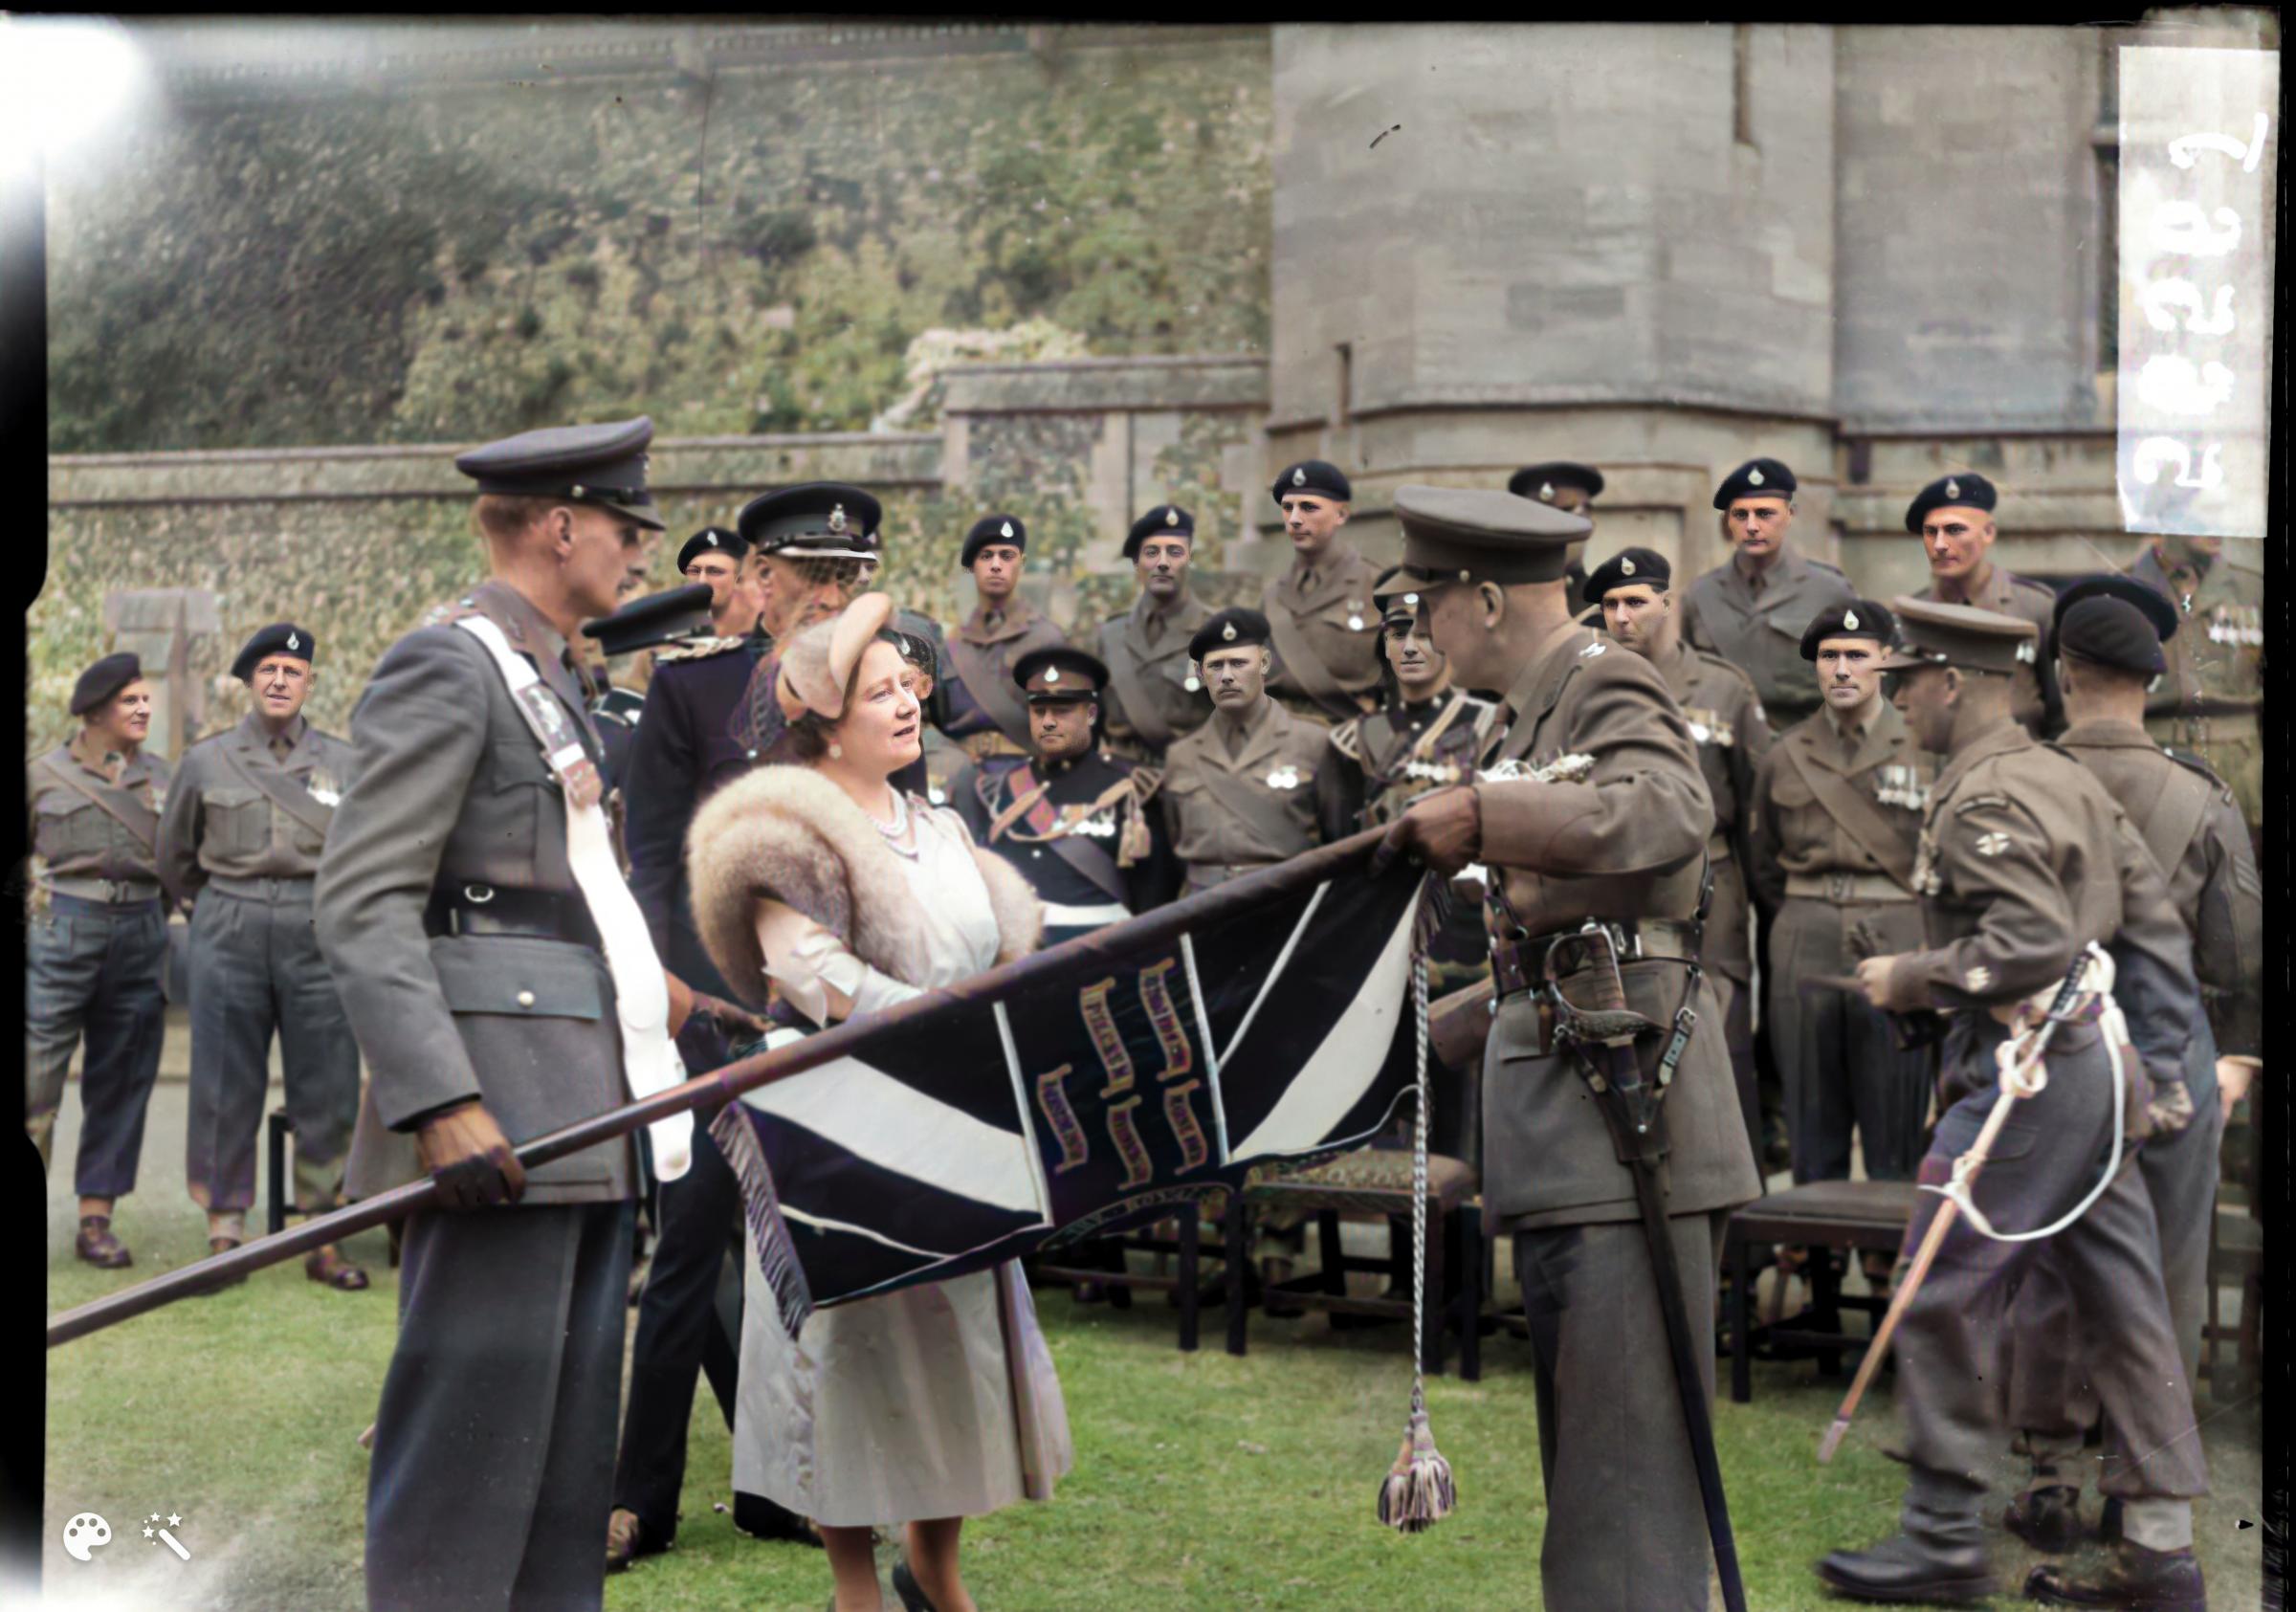 A visit from the Queen Mother, 1951